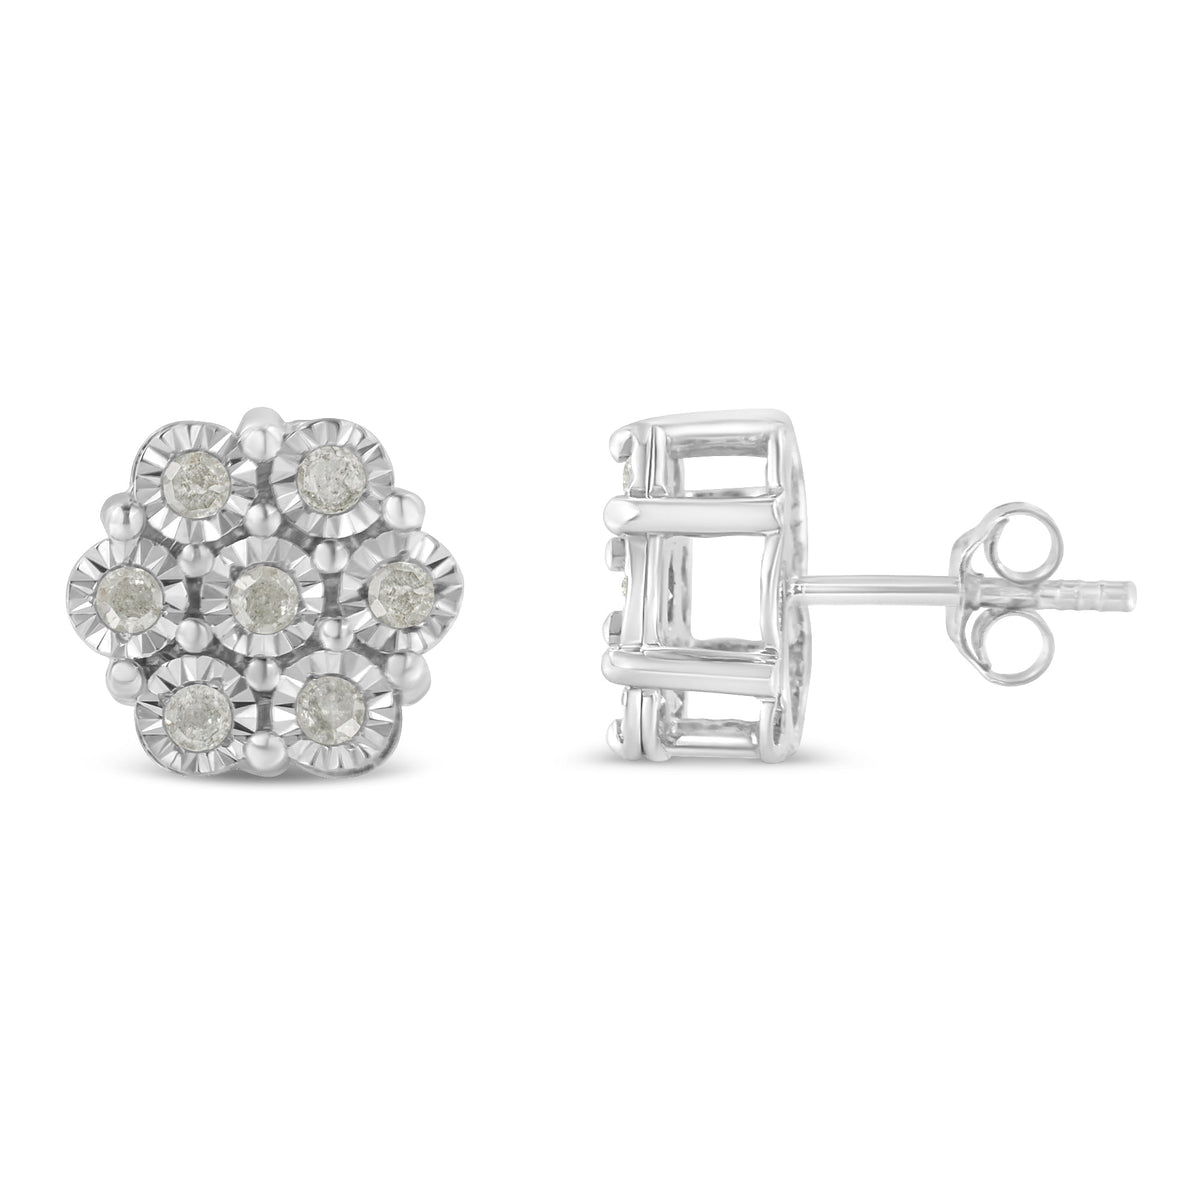 .925 Sterling Silver 1/2 Cttw Round-Cut Diamond Miracle-Set Floral Cluster Button Stud Earrings (I-J Color, I2-I3 Clarity) - LinkagejewelrydesignLinkagejewelrydesign